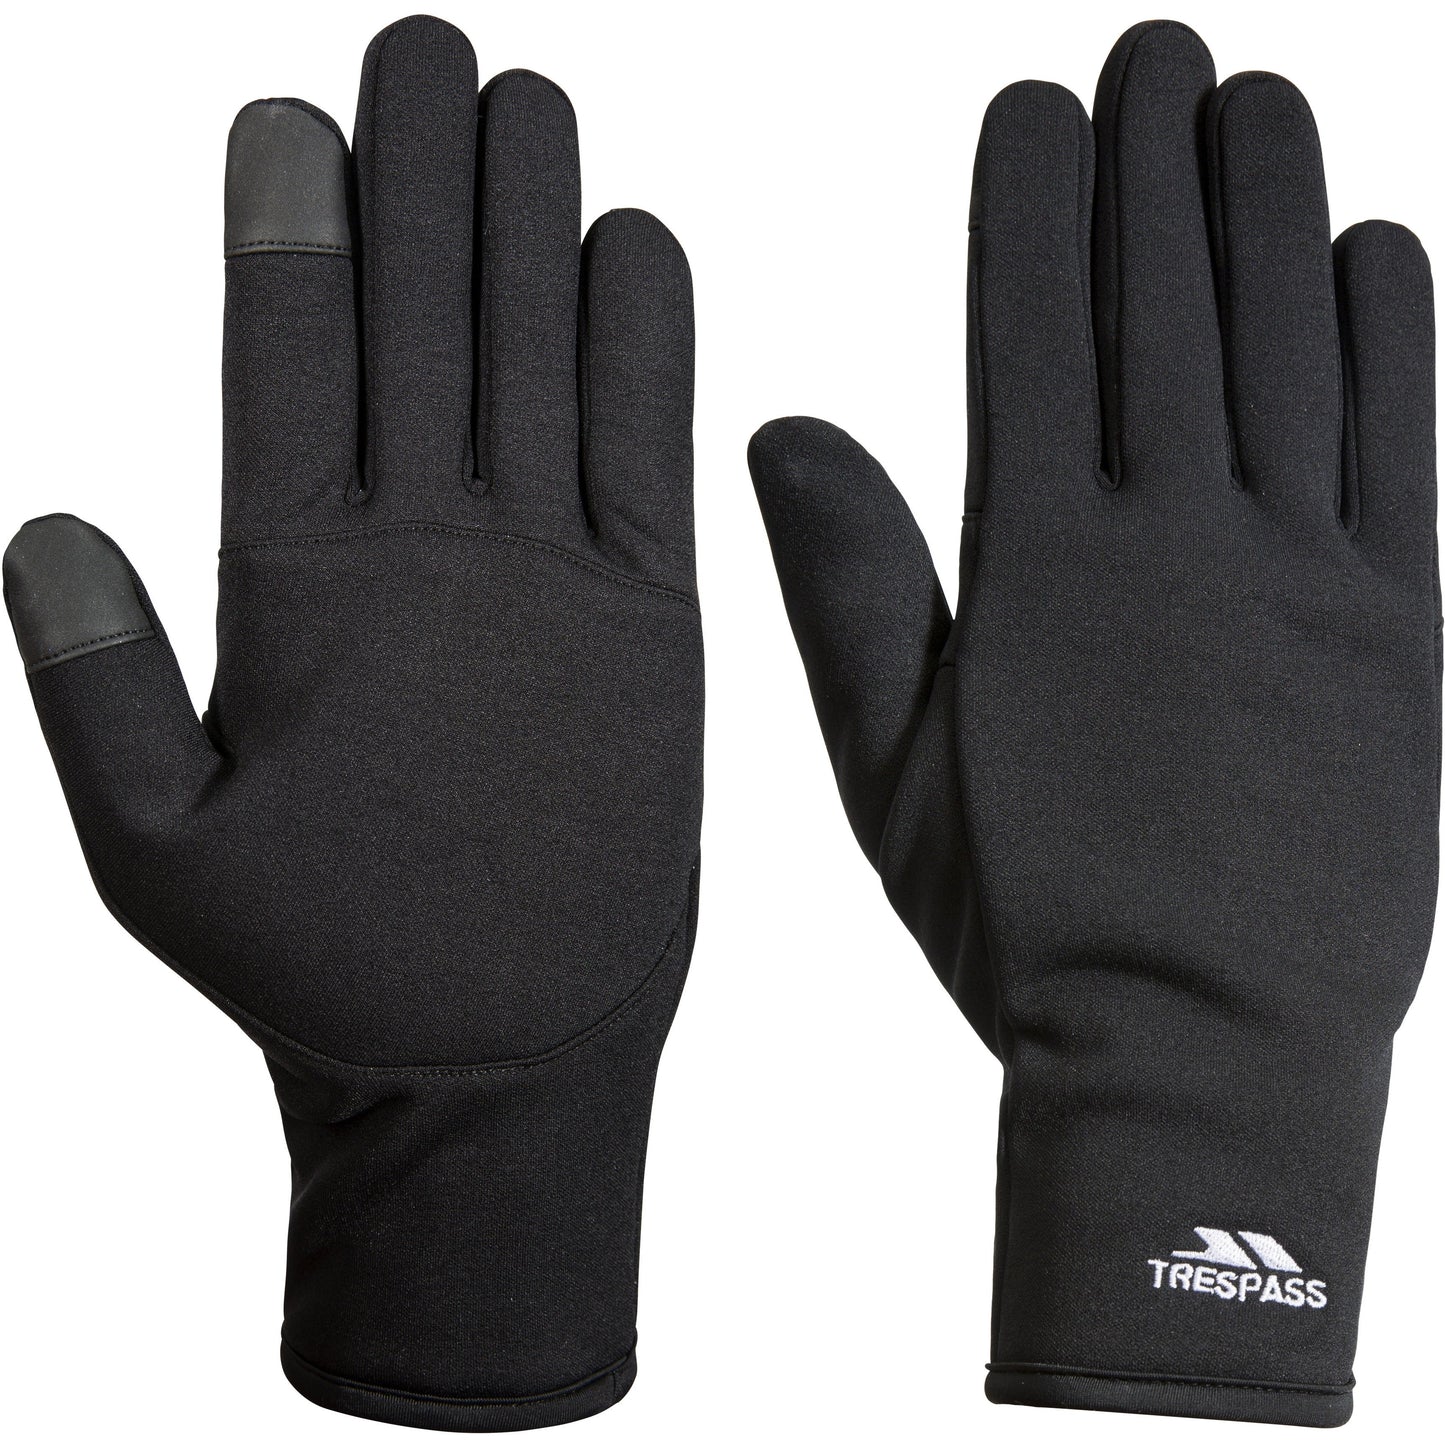 Poliner - Unisex Adults' Stretch Gloves With Touch Screen Fingertips